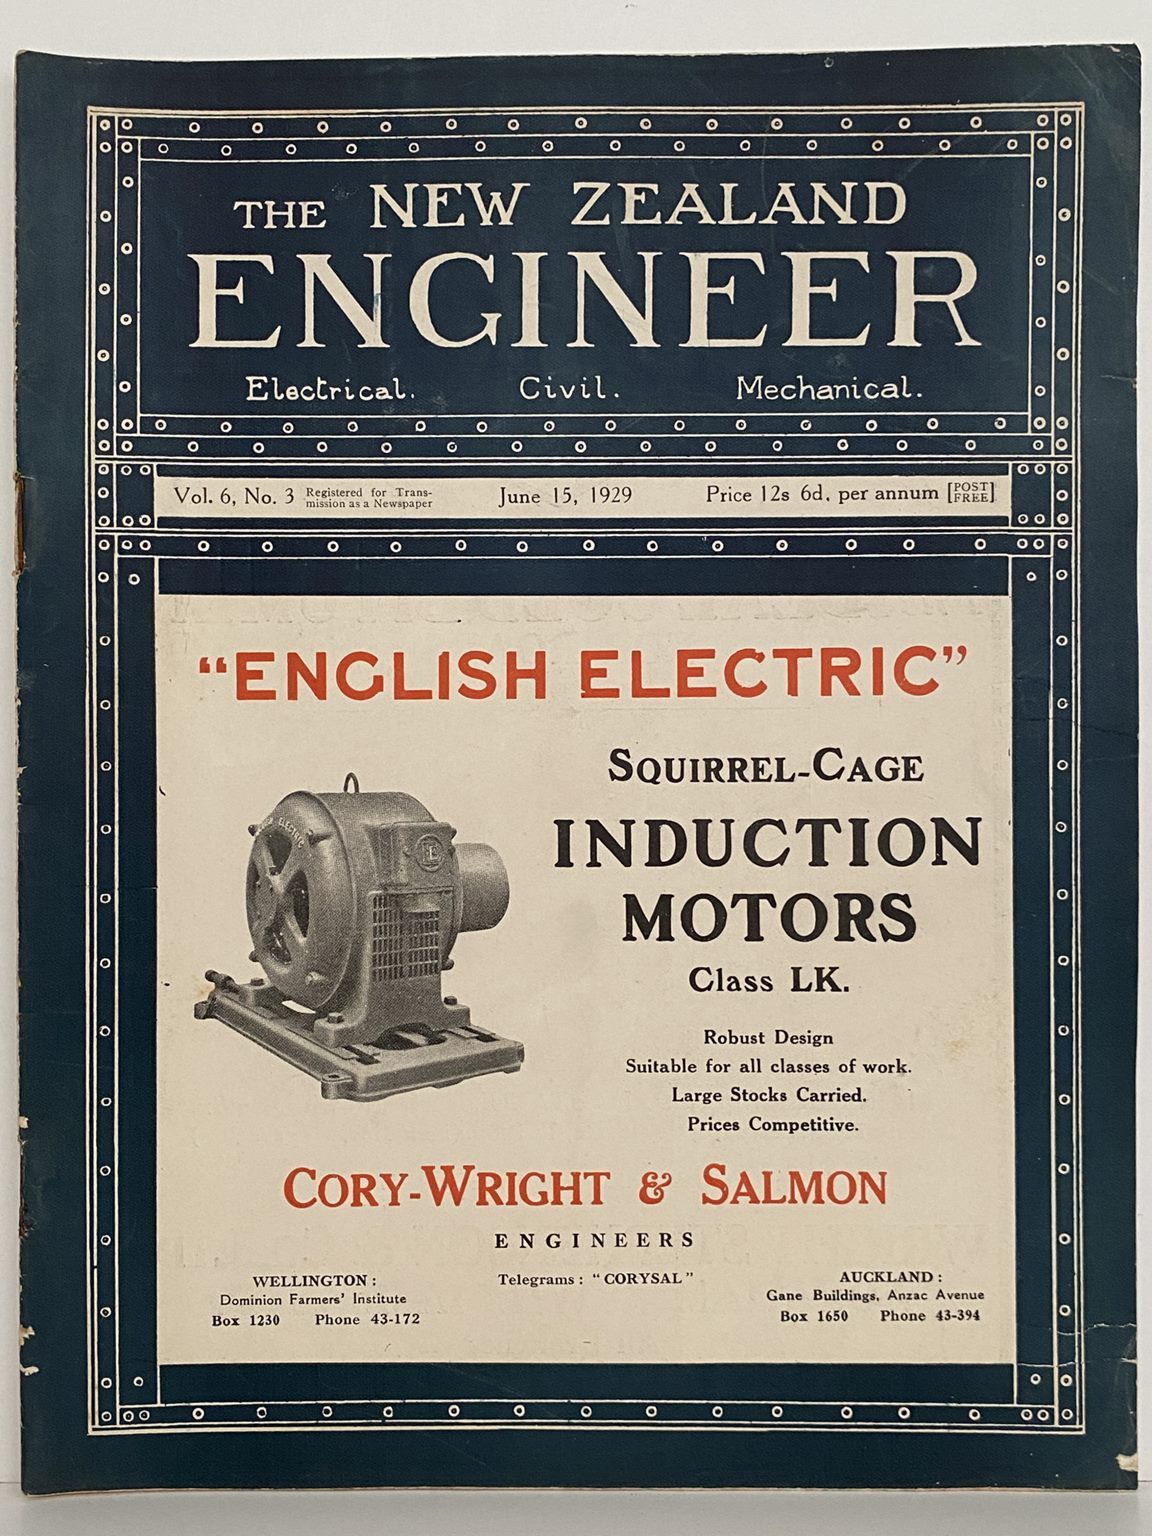 OLD MAGAZINE: The New Zealand Engineer Vol. 6, No. 3 - 15 June 1929